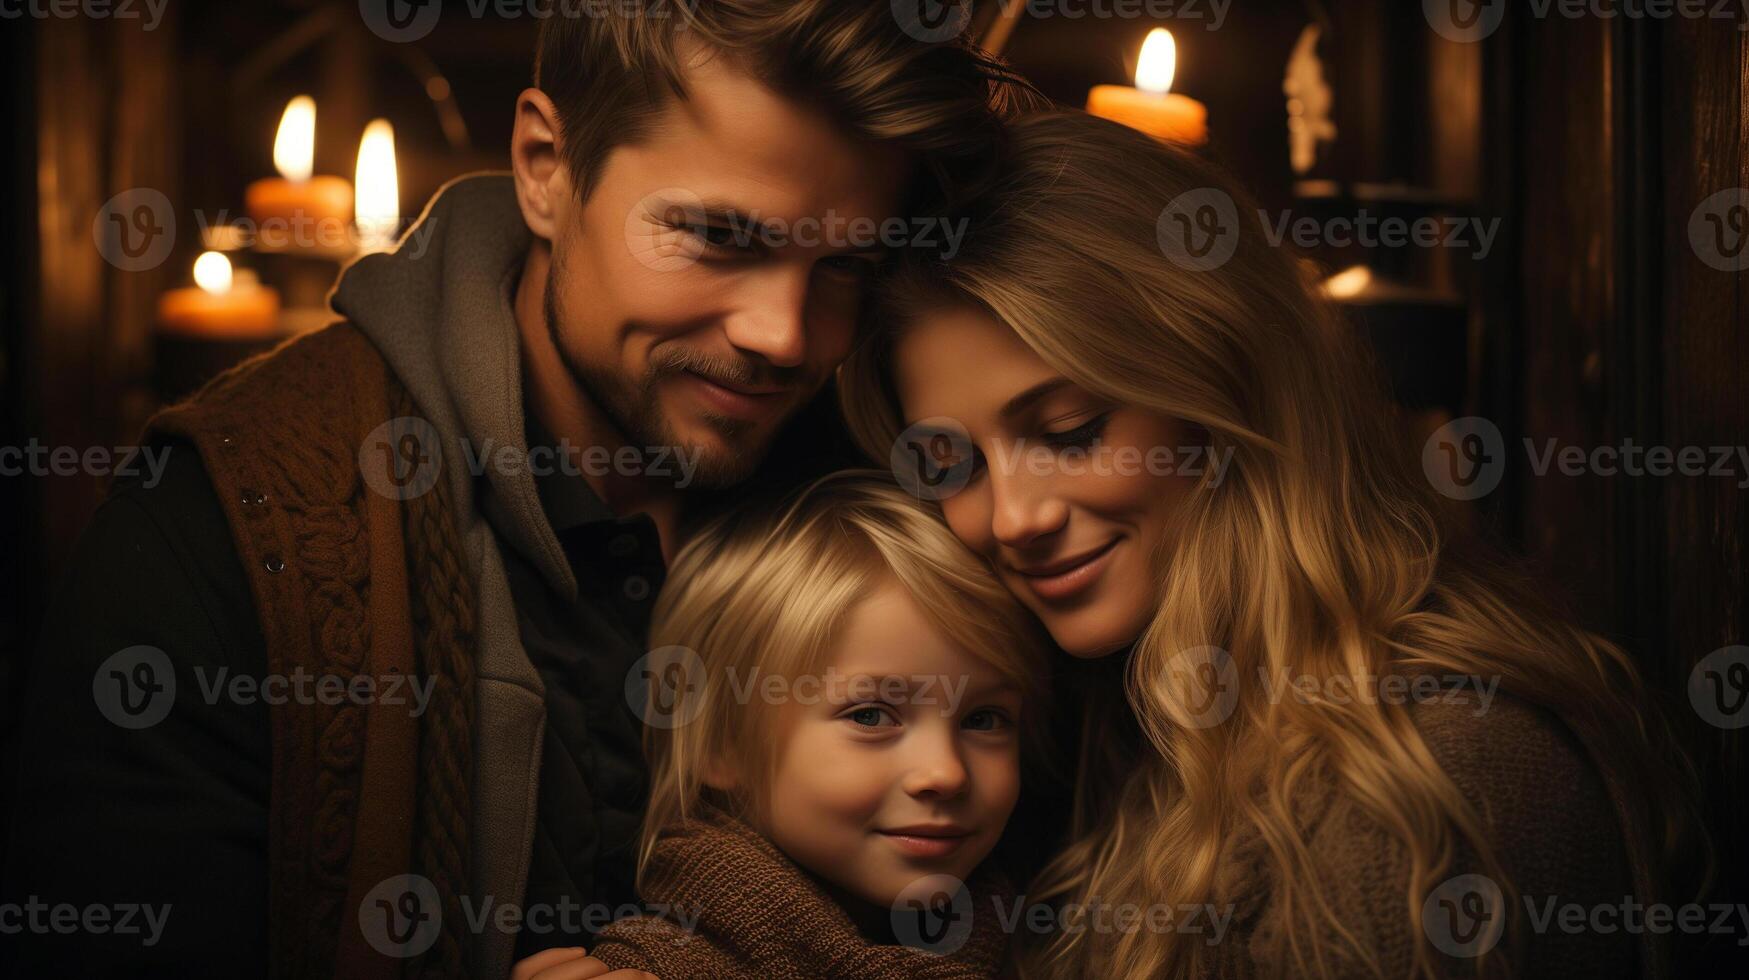 AI generated Family of three - man, woman, and young child - standing together in dimly lit room with candles surrounding them. They are all smiling and embracing each other, creating warm atmosphere. photo